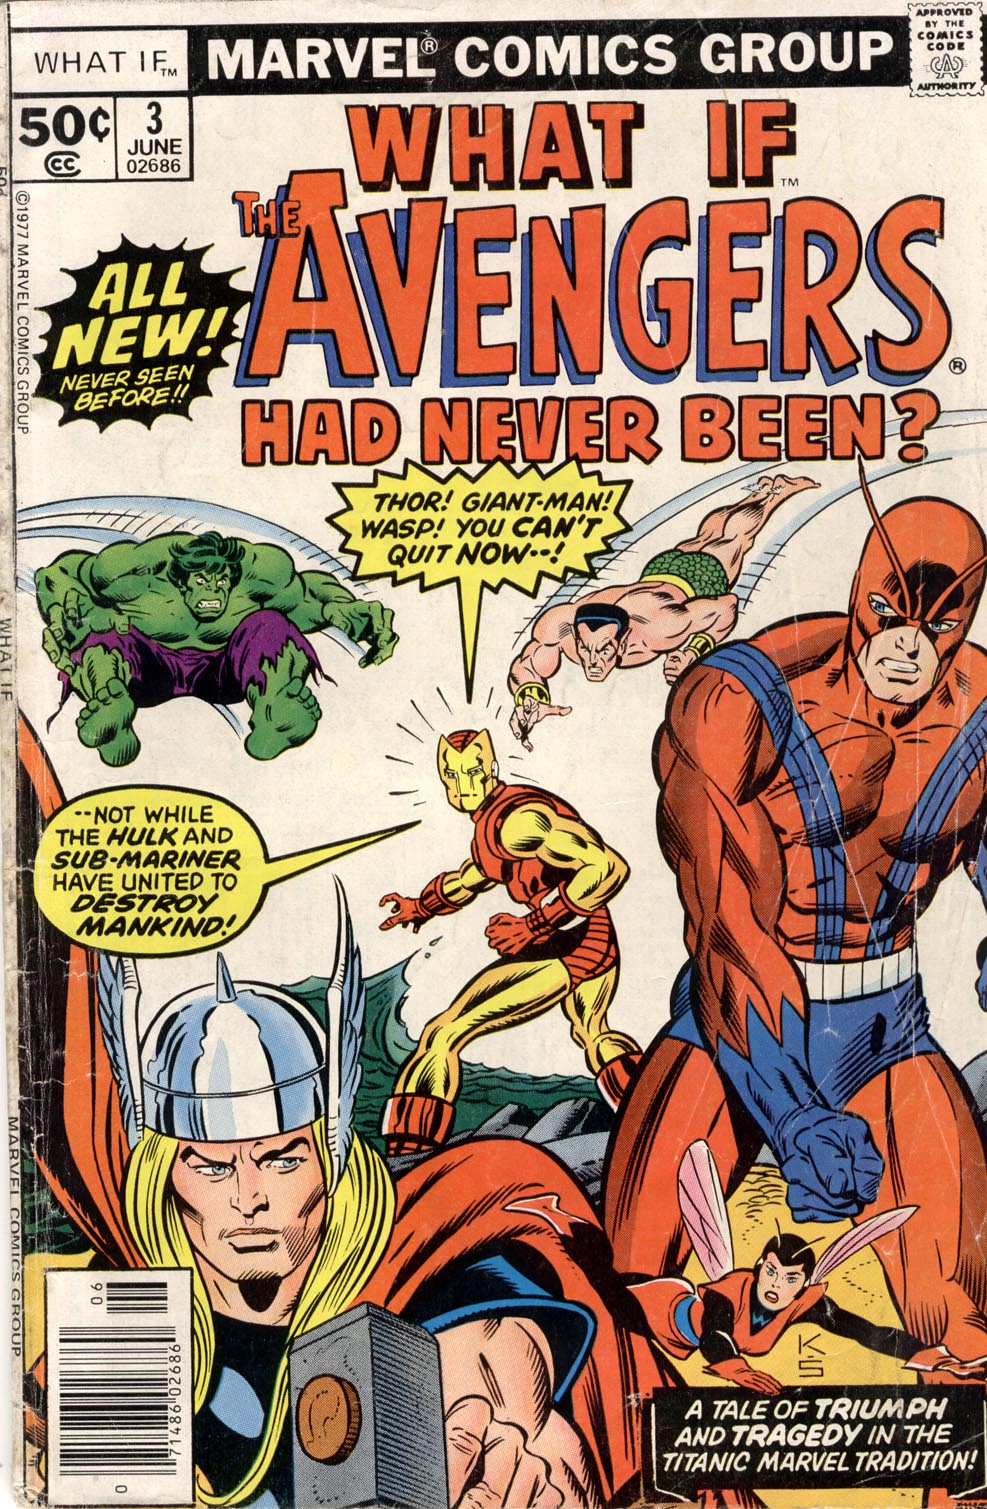 The Avengers had never been